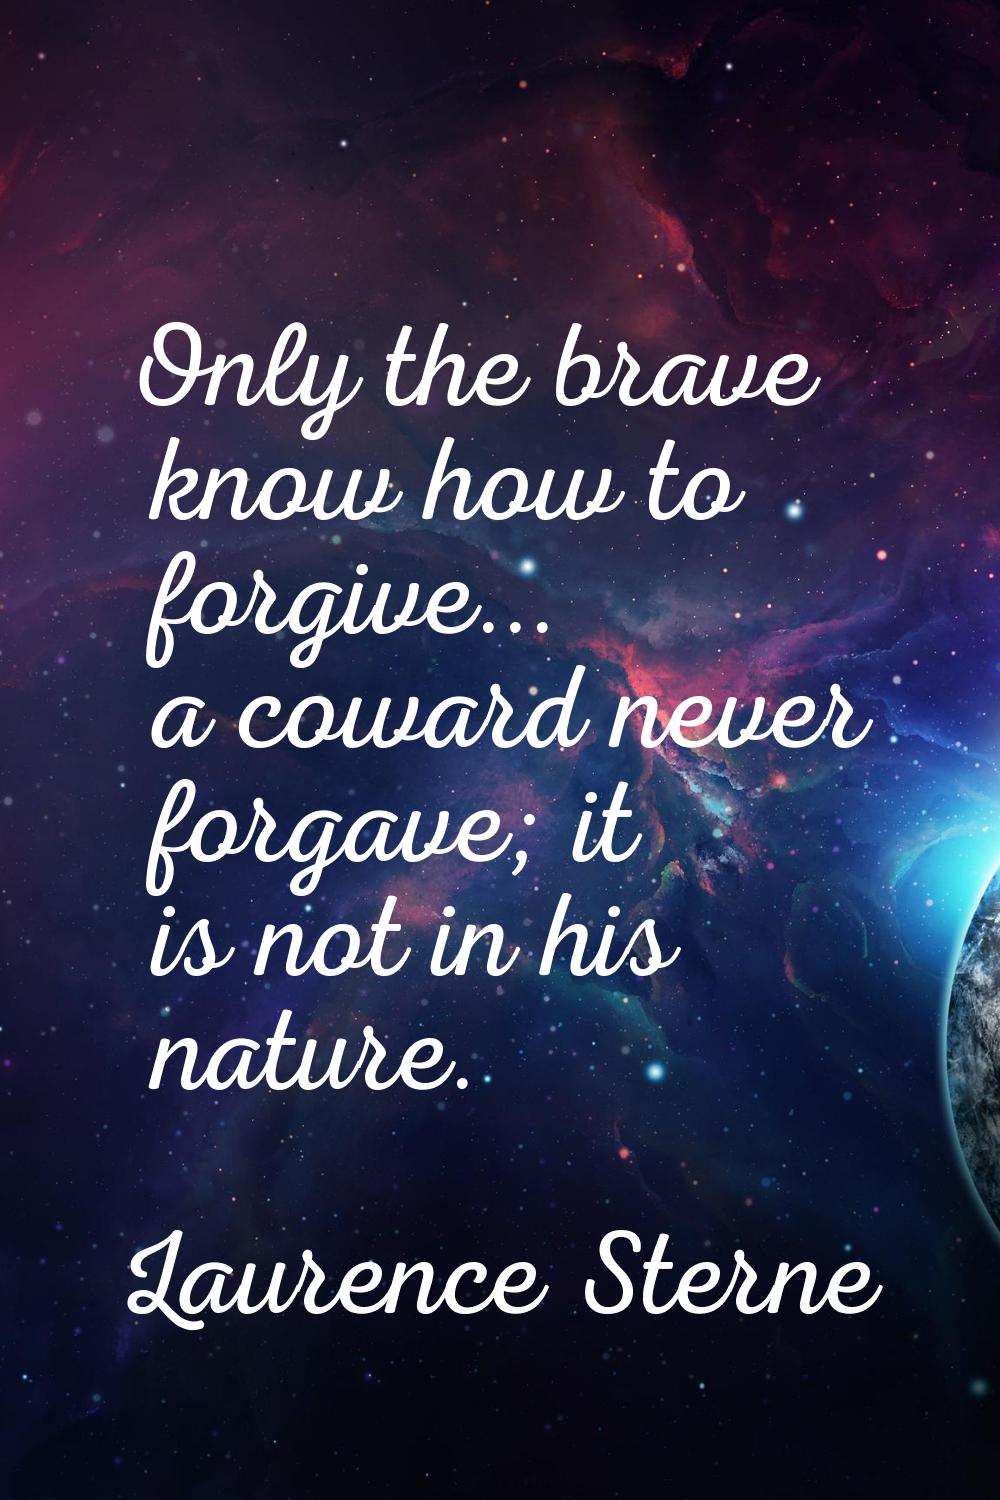 Only the brave know how to forgive... a coward never forgave; it is not in his nature.